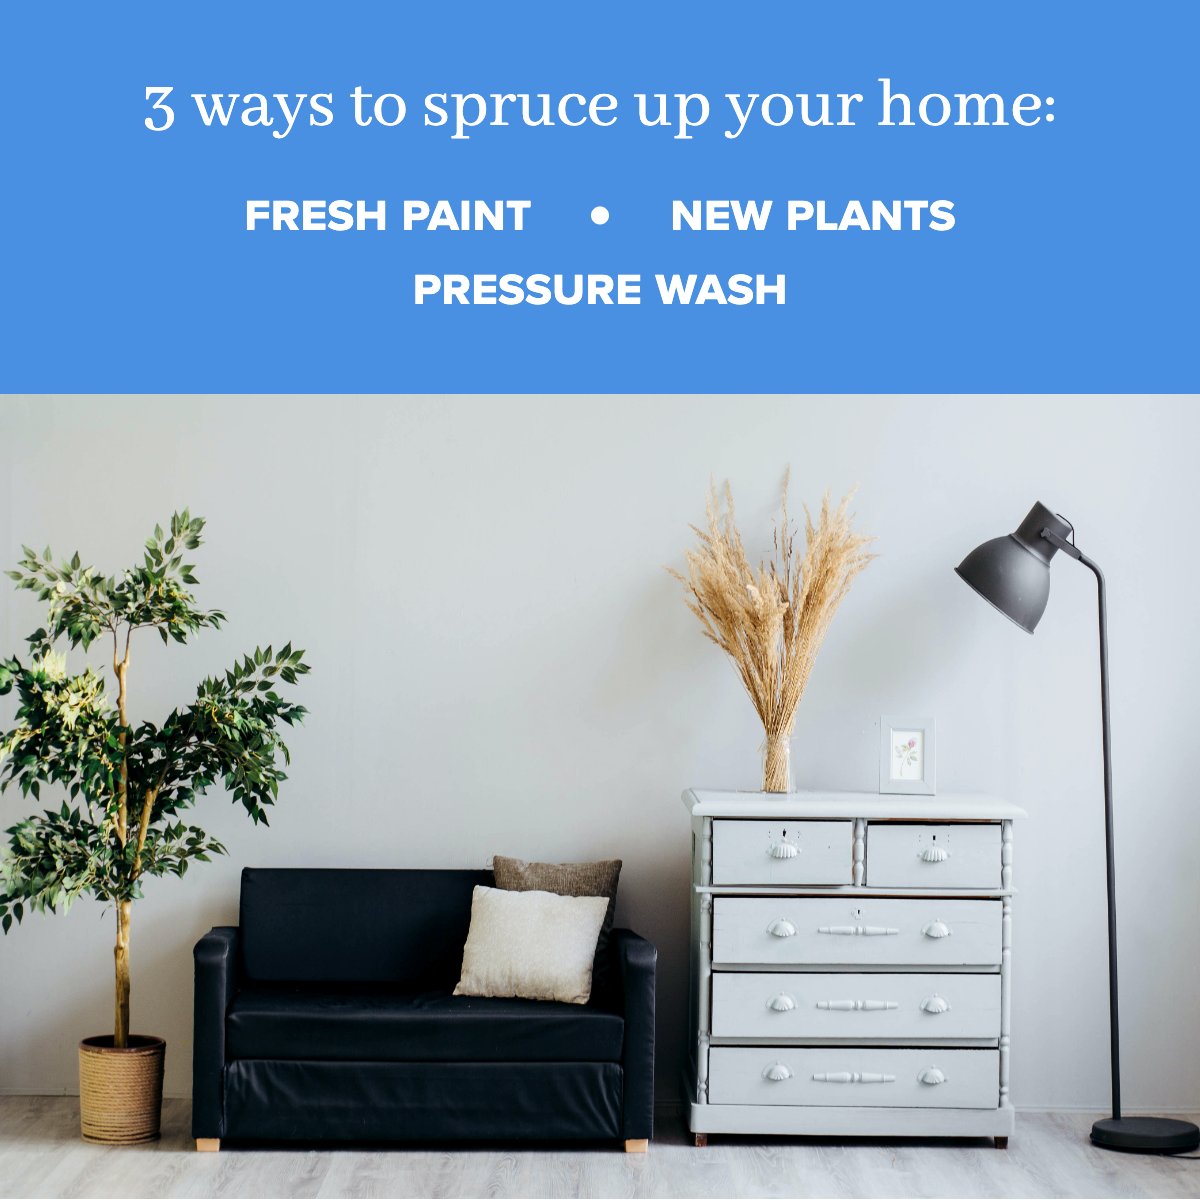 Try this tip to spruce up your home! 😎 Leave us your best design tip! 👇 #home #spruce #design #modern #realestate #BroughtonProperties #518 #KWRI #KWRN #SaratogaNY #HudsonNY #UpstateNY #KWBroughtonProperties #UpstateLuxuryProperties #UpstateNYLuxury